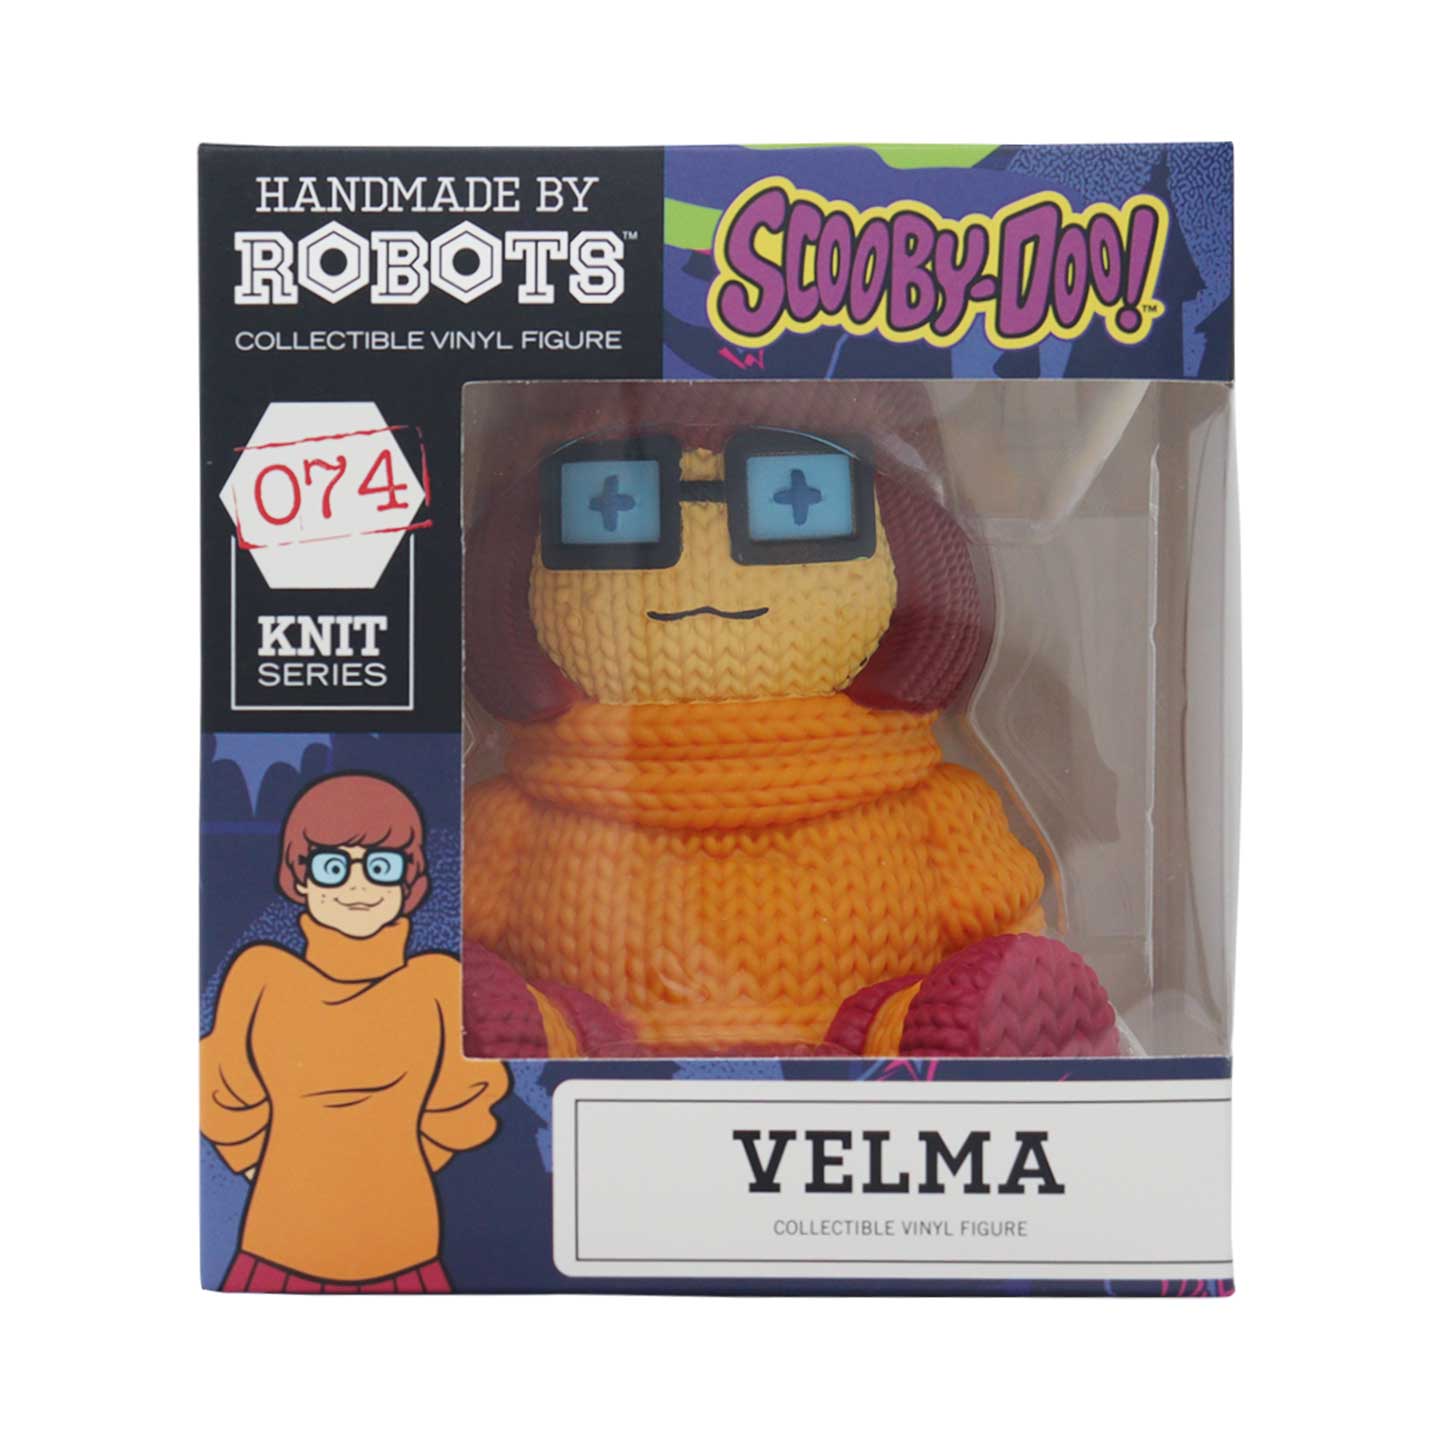 Scooby-Doo - Velma Collectible Vinyl Figure from Handmade By Robots